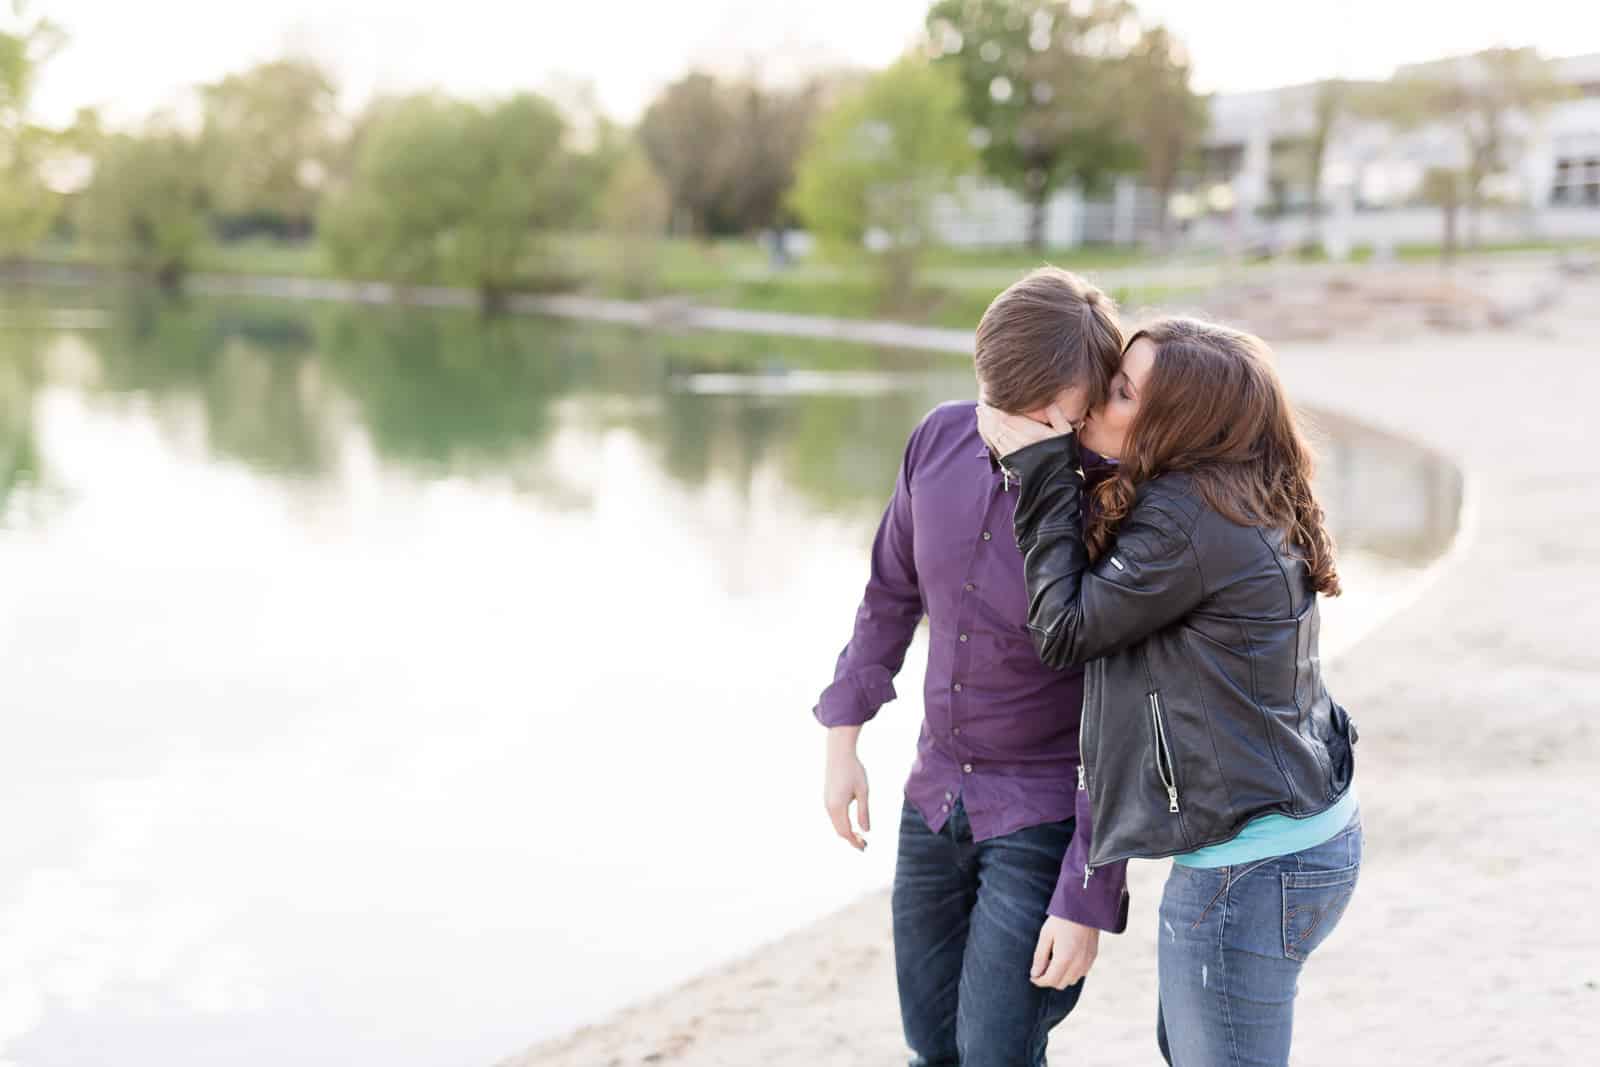 Engagement Shooting am Oedtsee in Traun, Christiane Eckl Photography